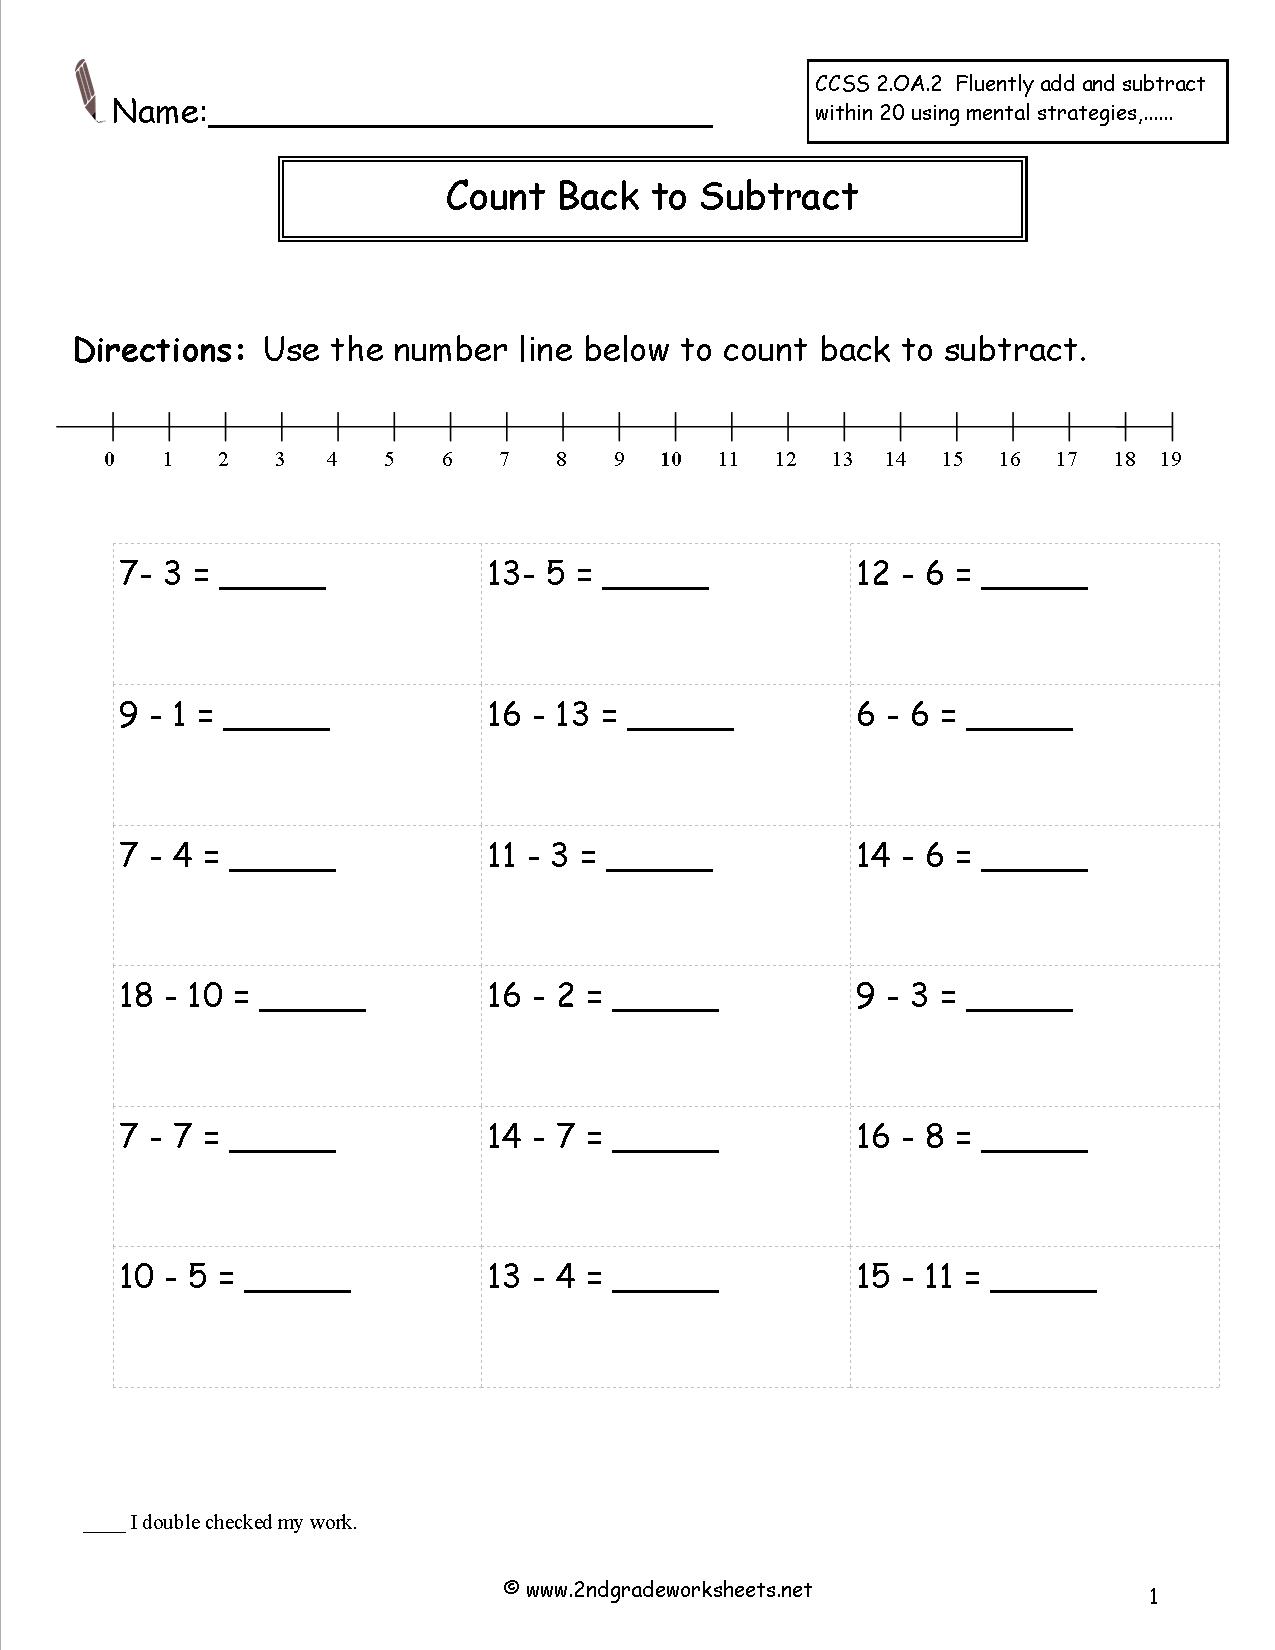 Subtraction Worksheets within 20